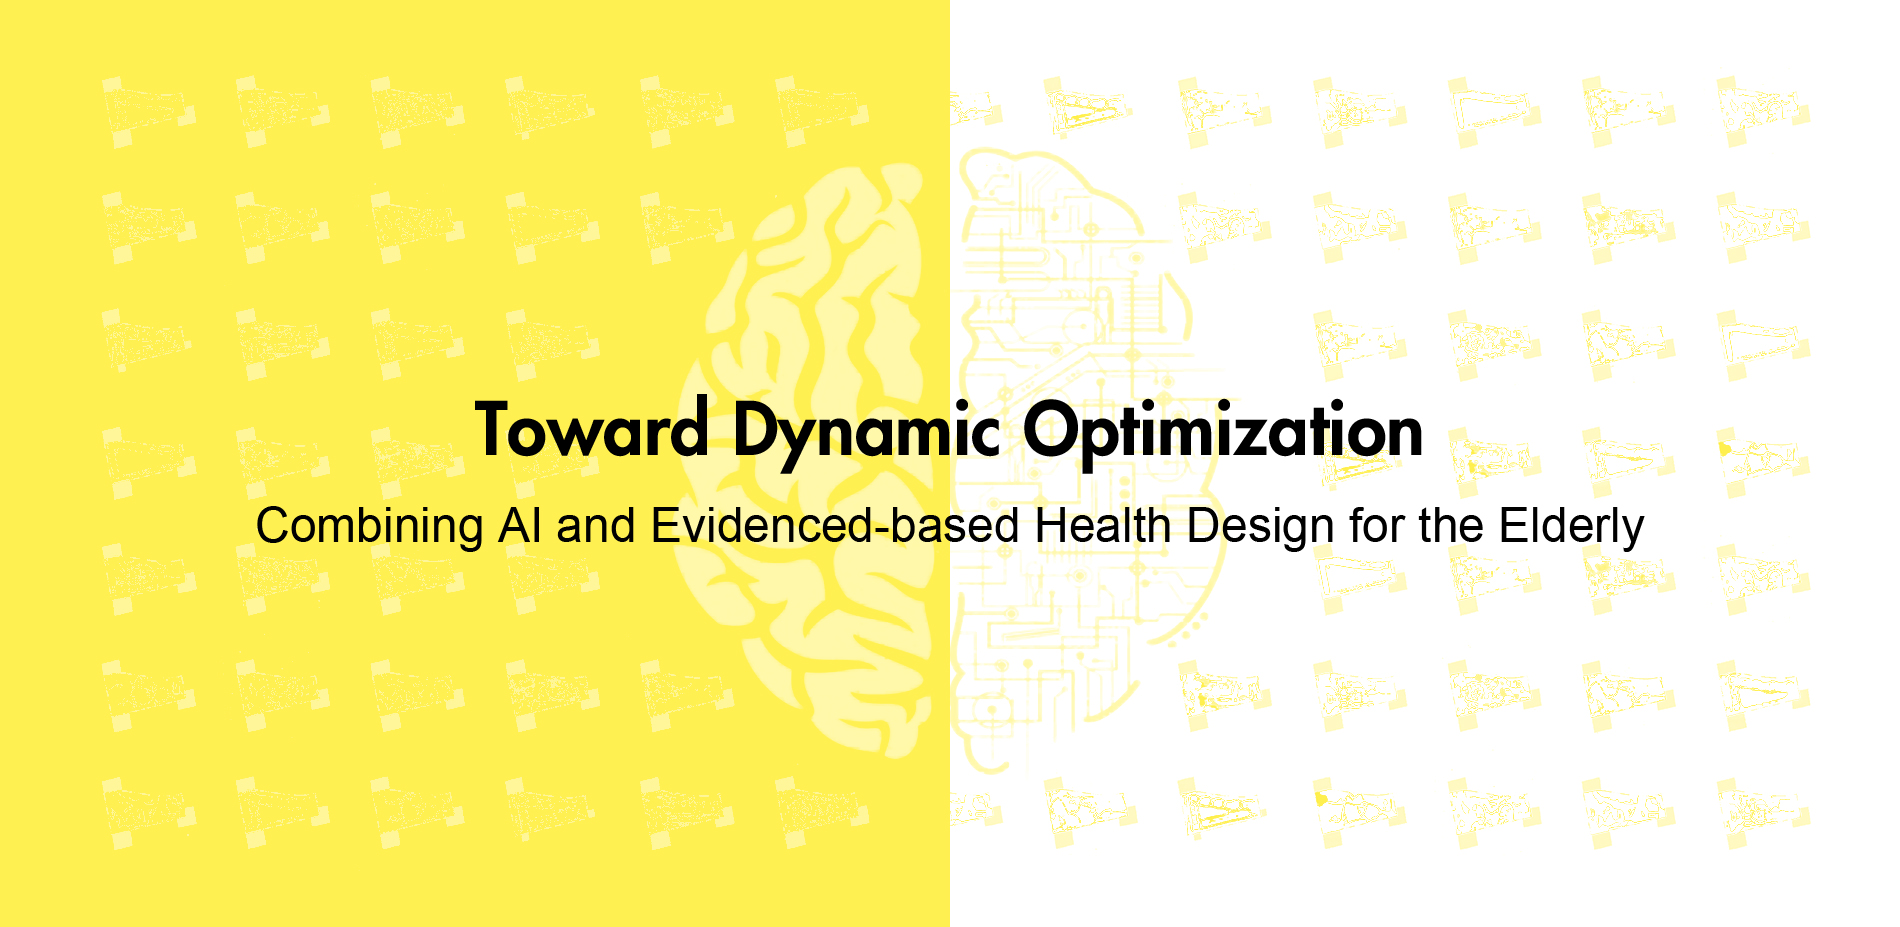 Toward Dynamic Optimization: Combining AI and Evidenced-based Health Design for the Elderly